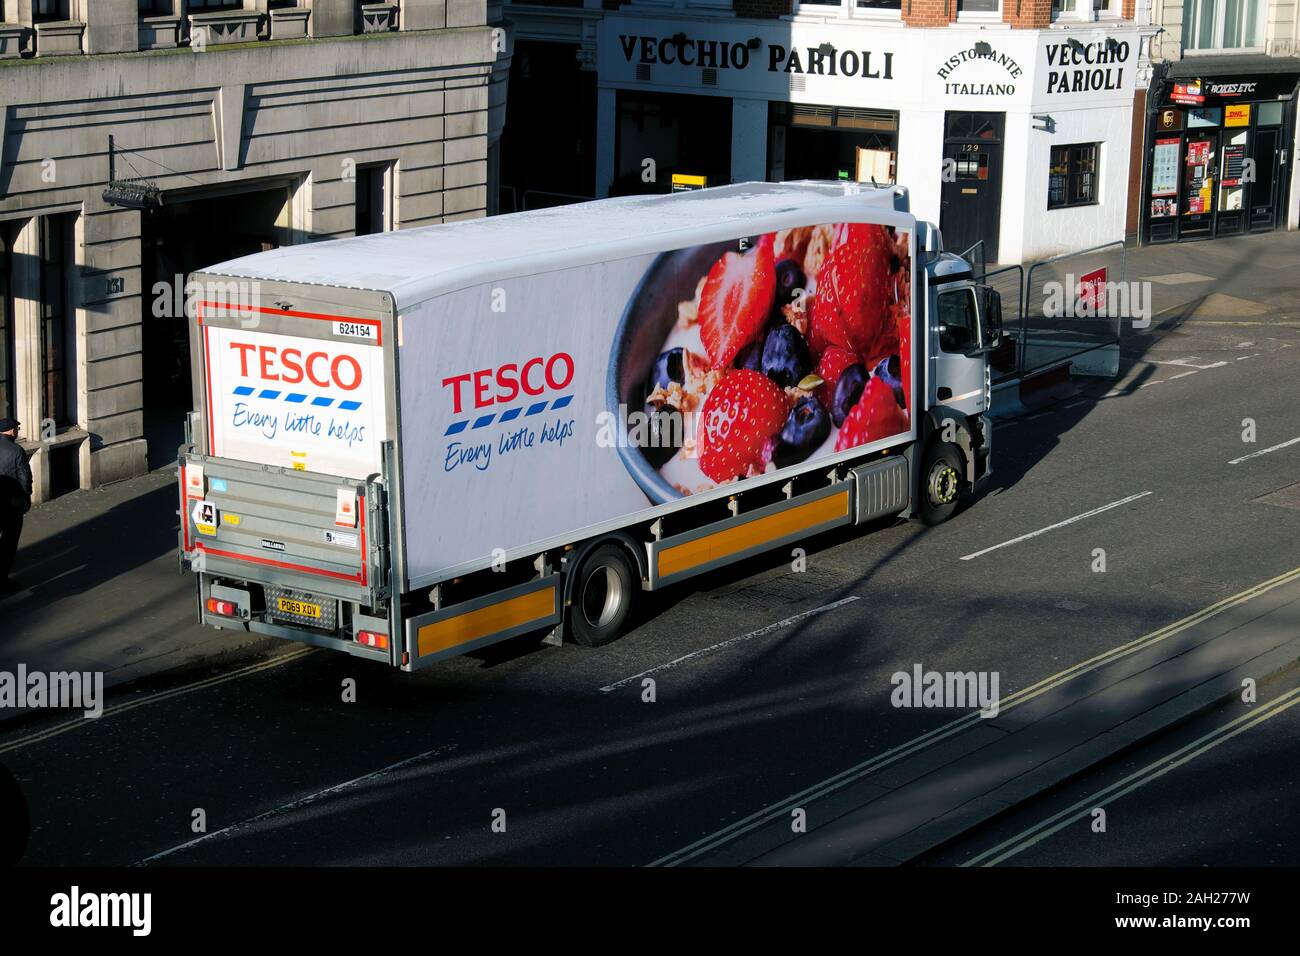 Tesco lorry delivery van parked in the road outside Tesco store in Goswell Road London EC2 England UK  KATHY DEWITT Stock Photo